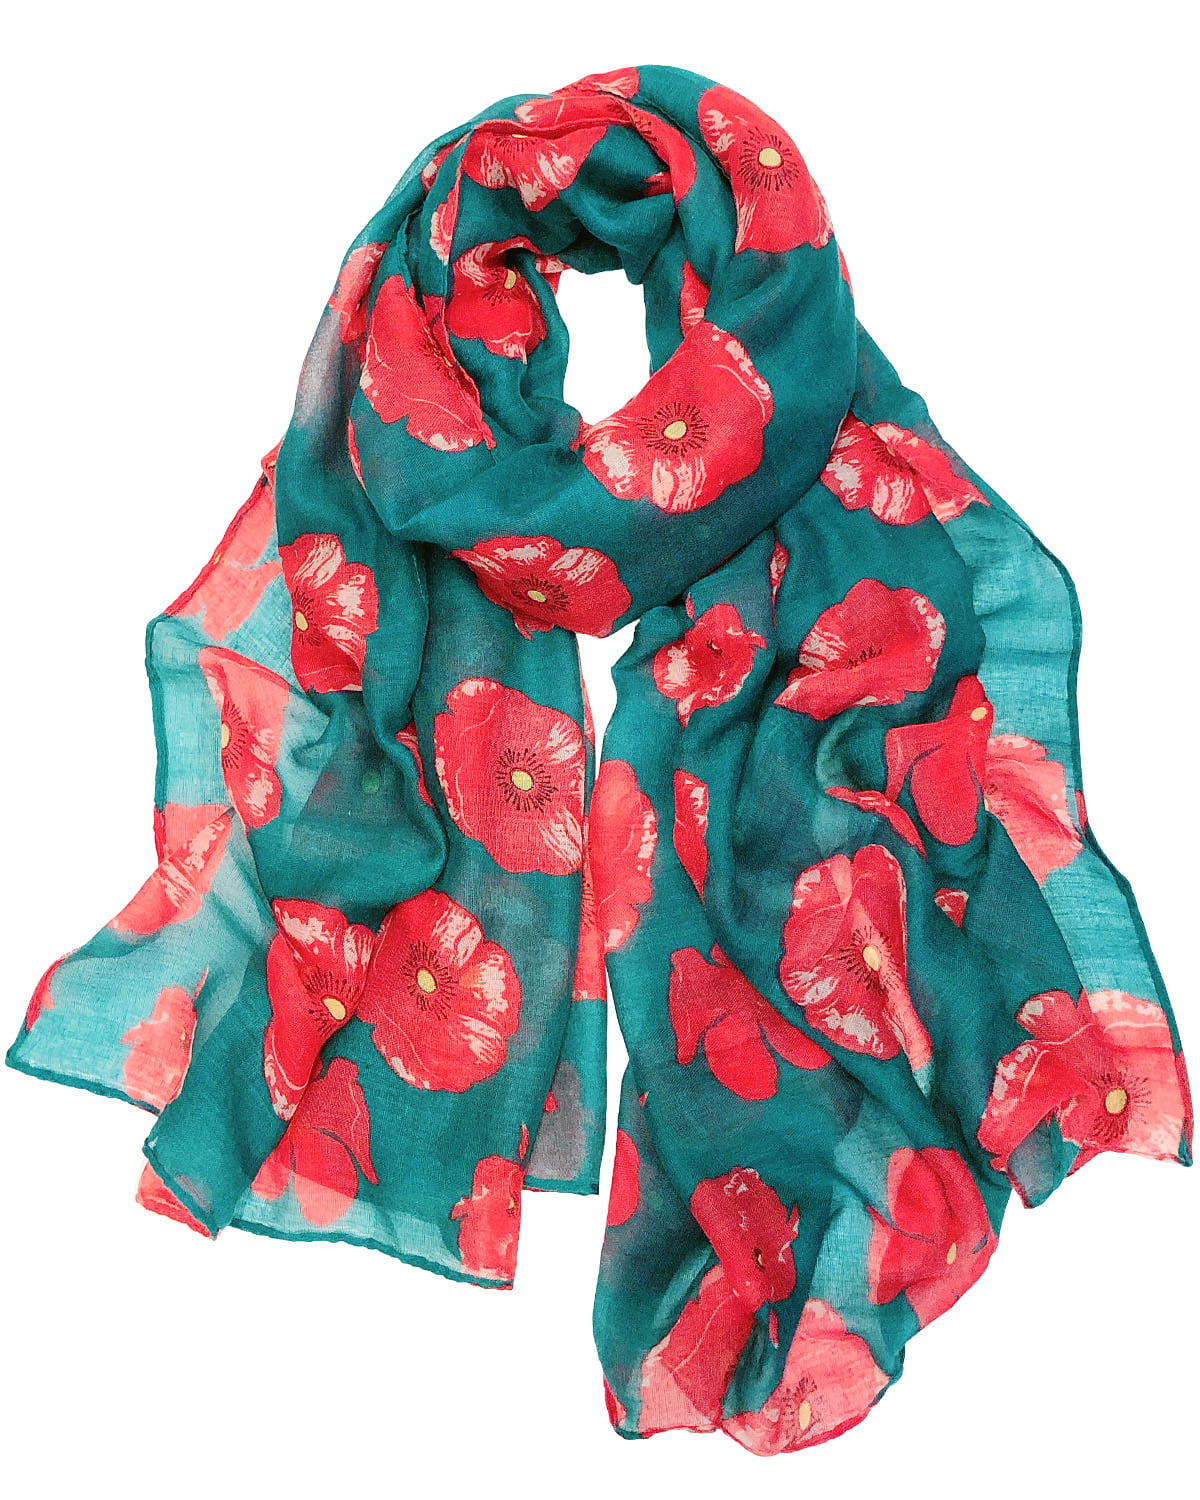 Light blue poppy Long Scarf Wrap lovely material brand new shawl gift Throw 